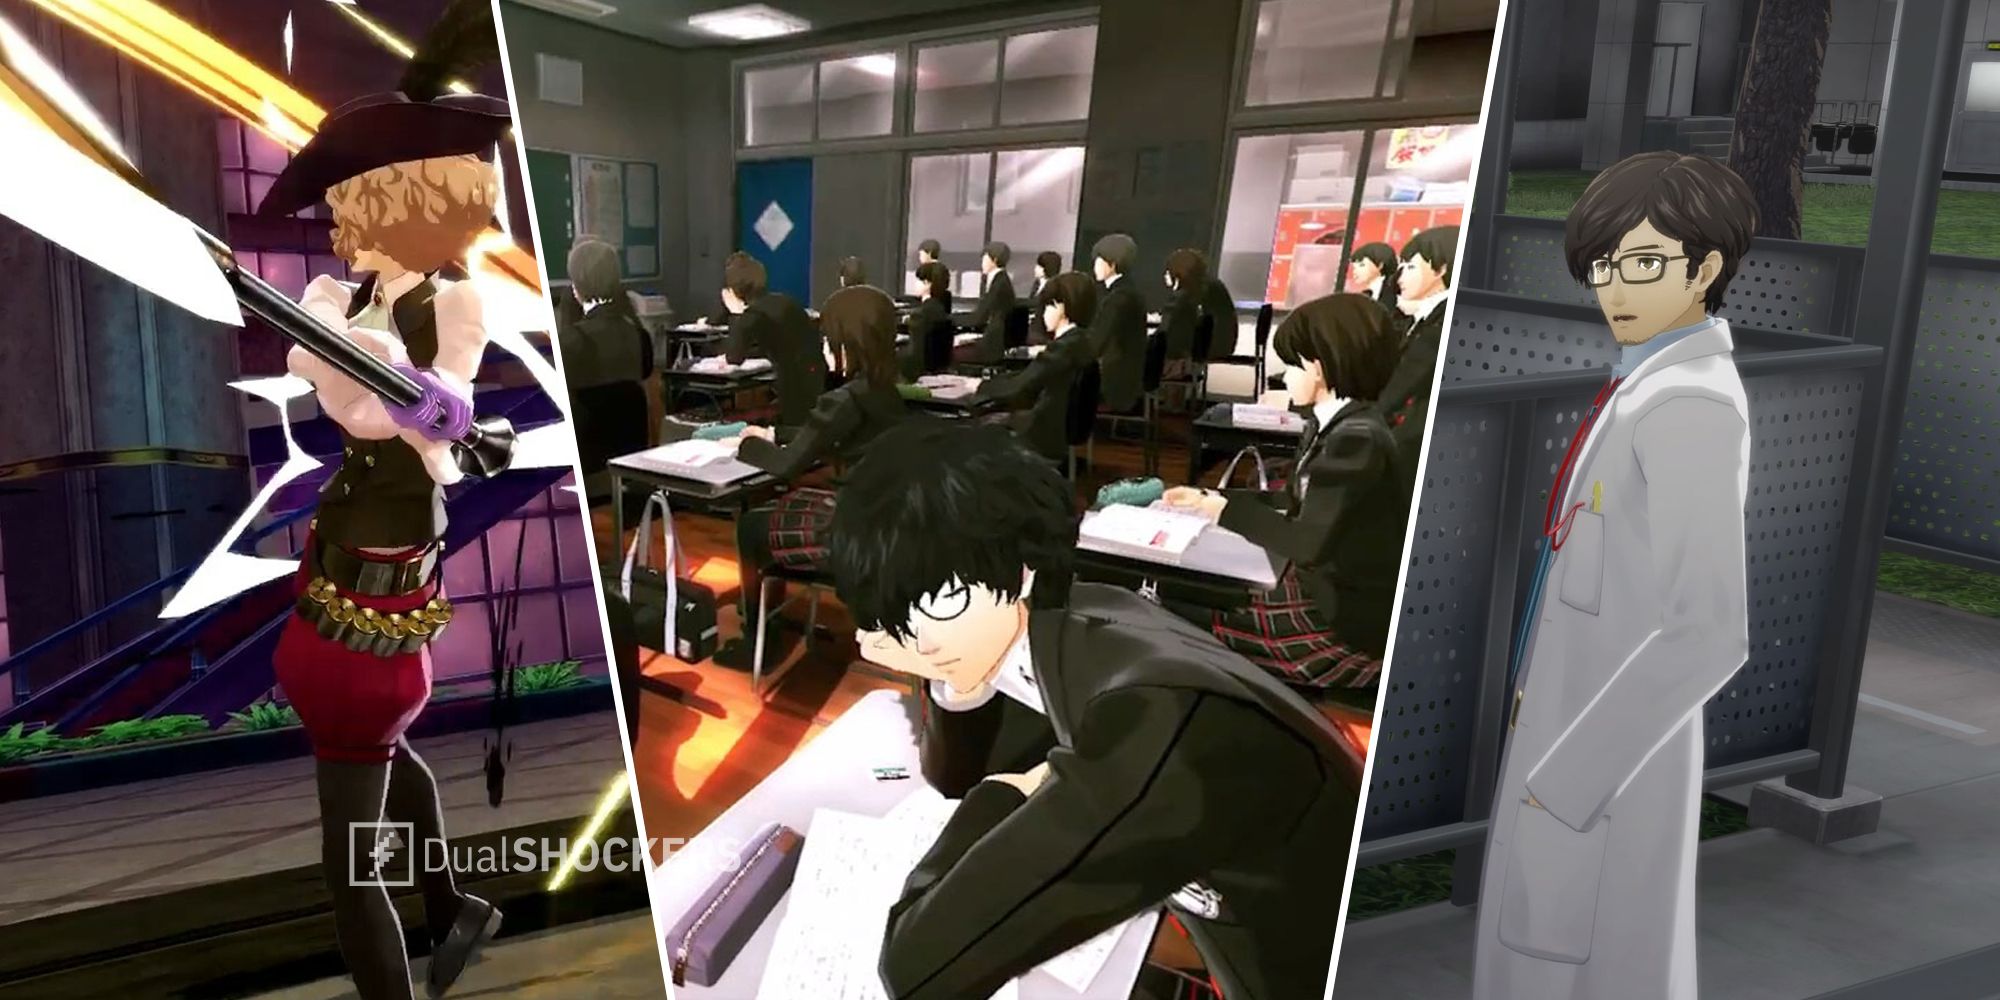 Persona 5 Royal battle gameplay, classroom with Joker